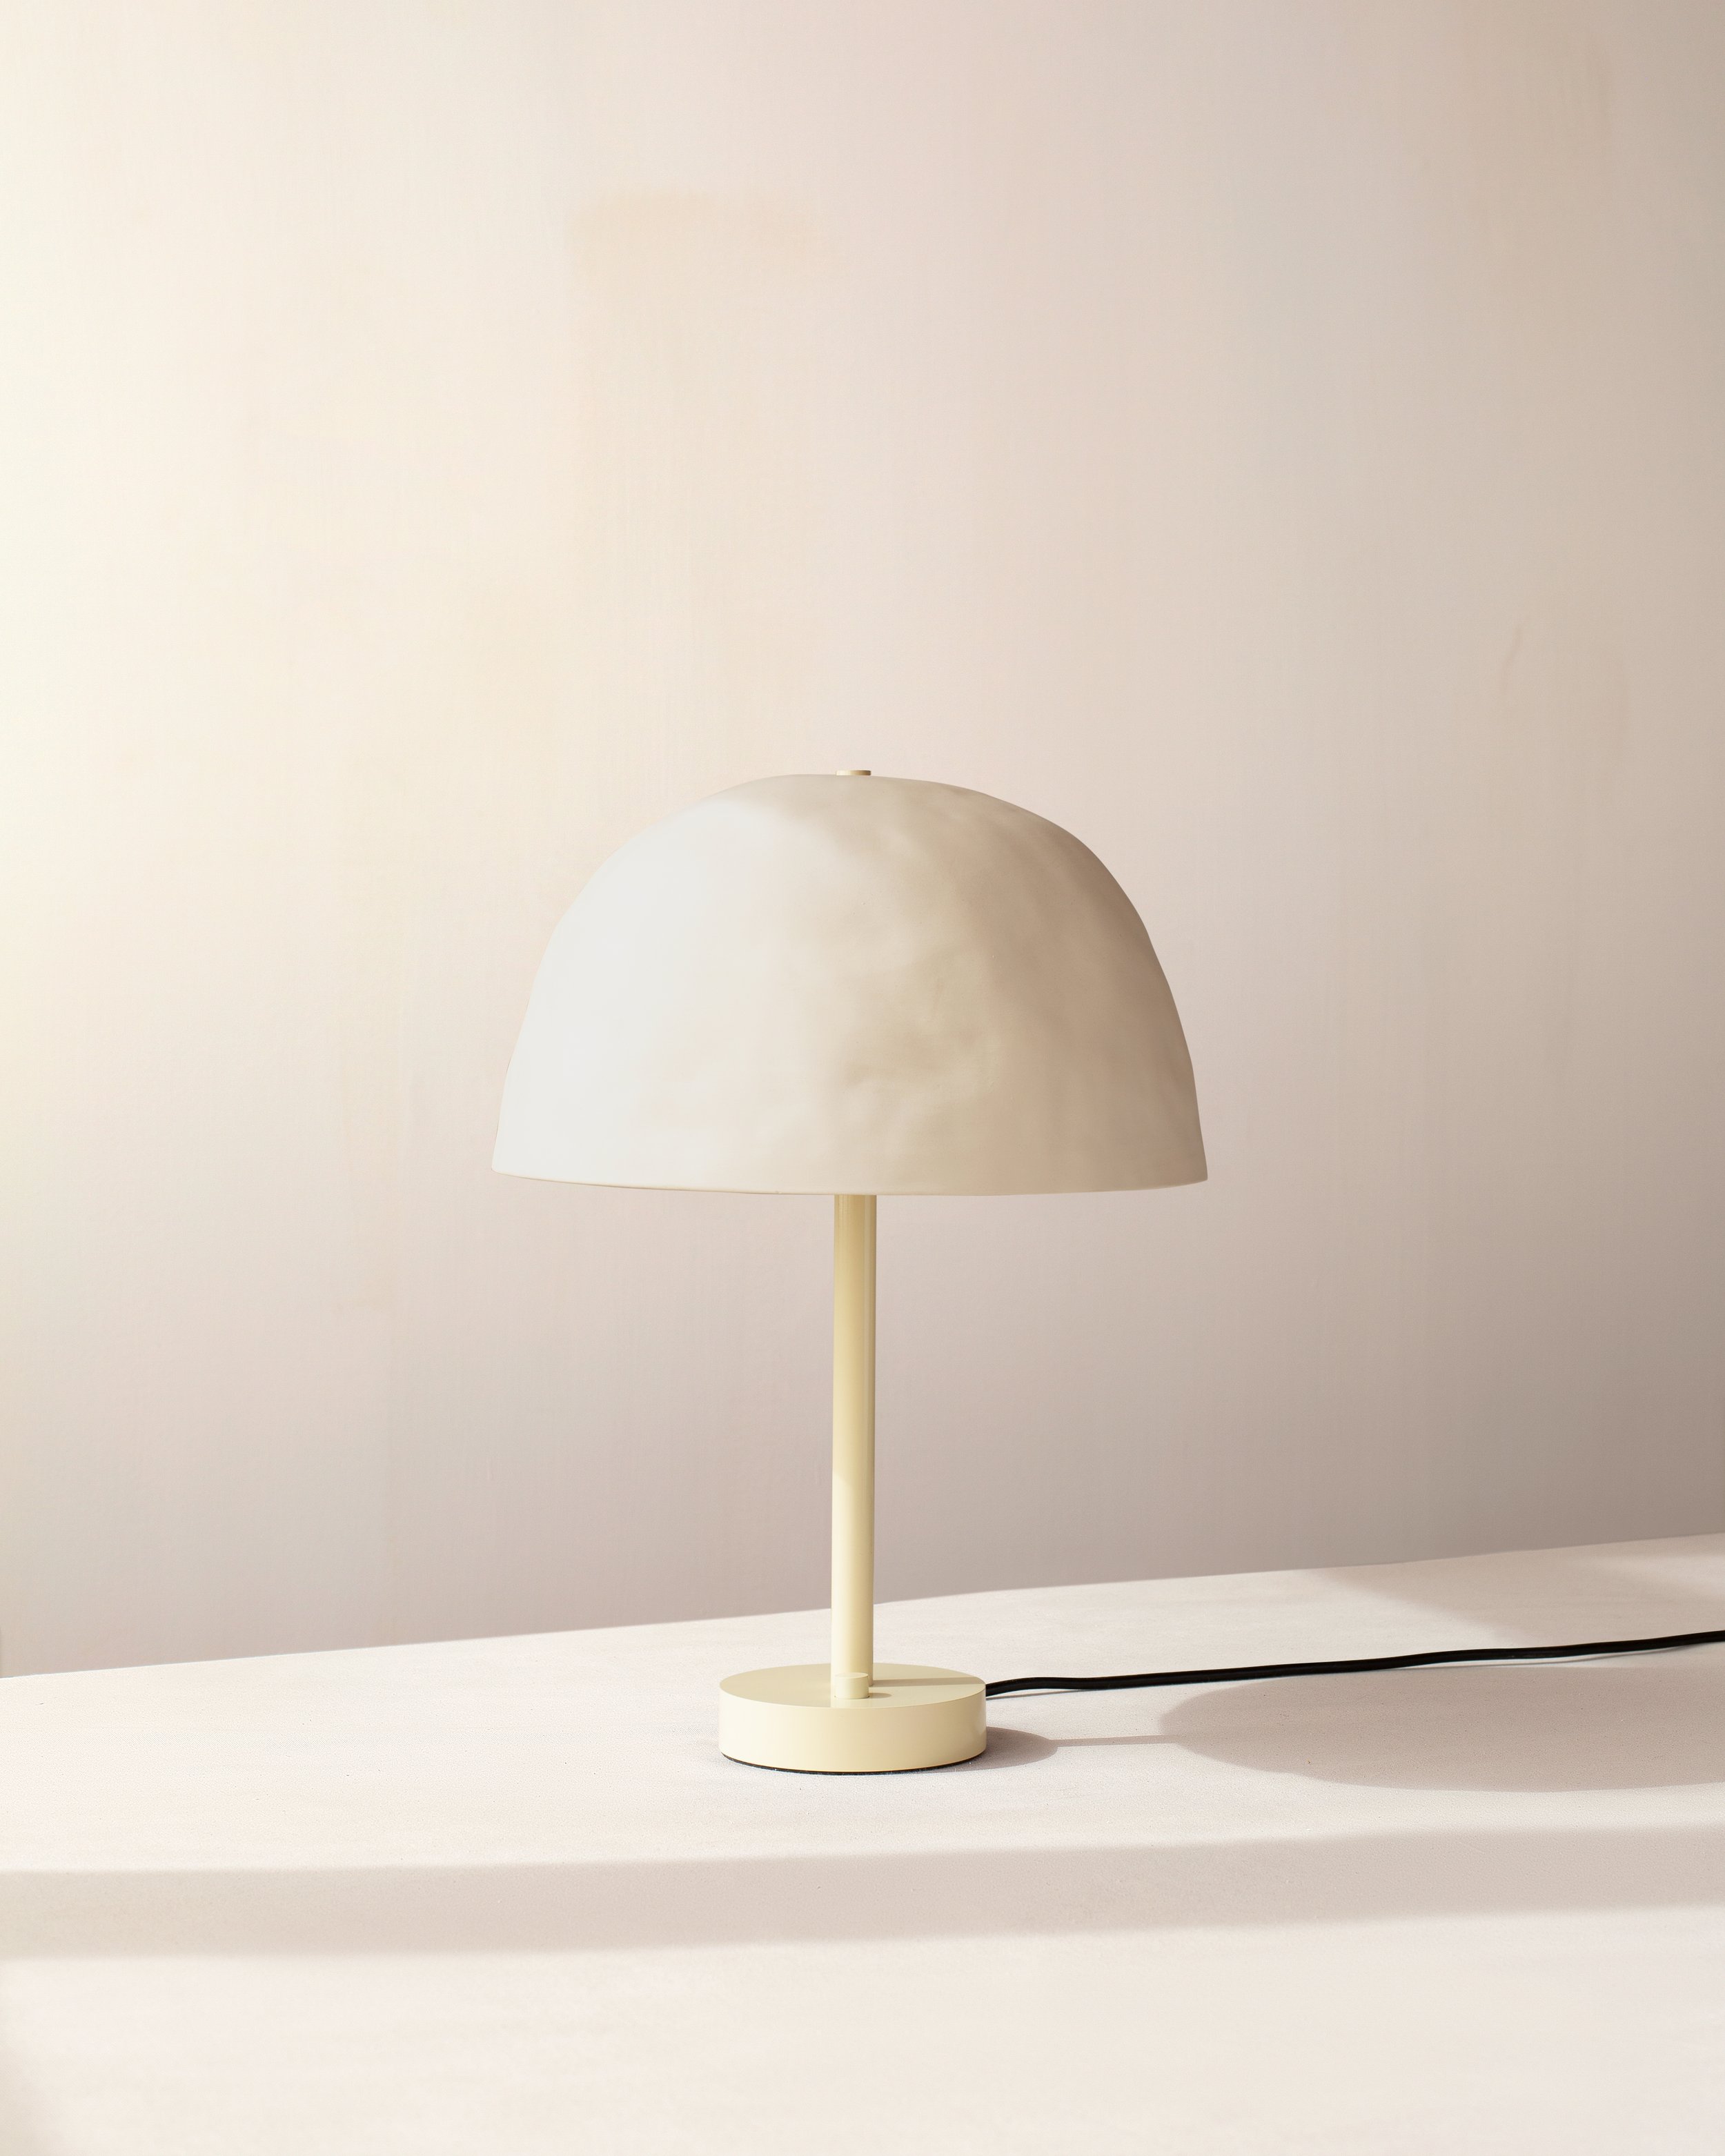 The Dome Table Lamp